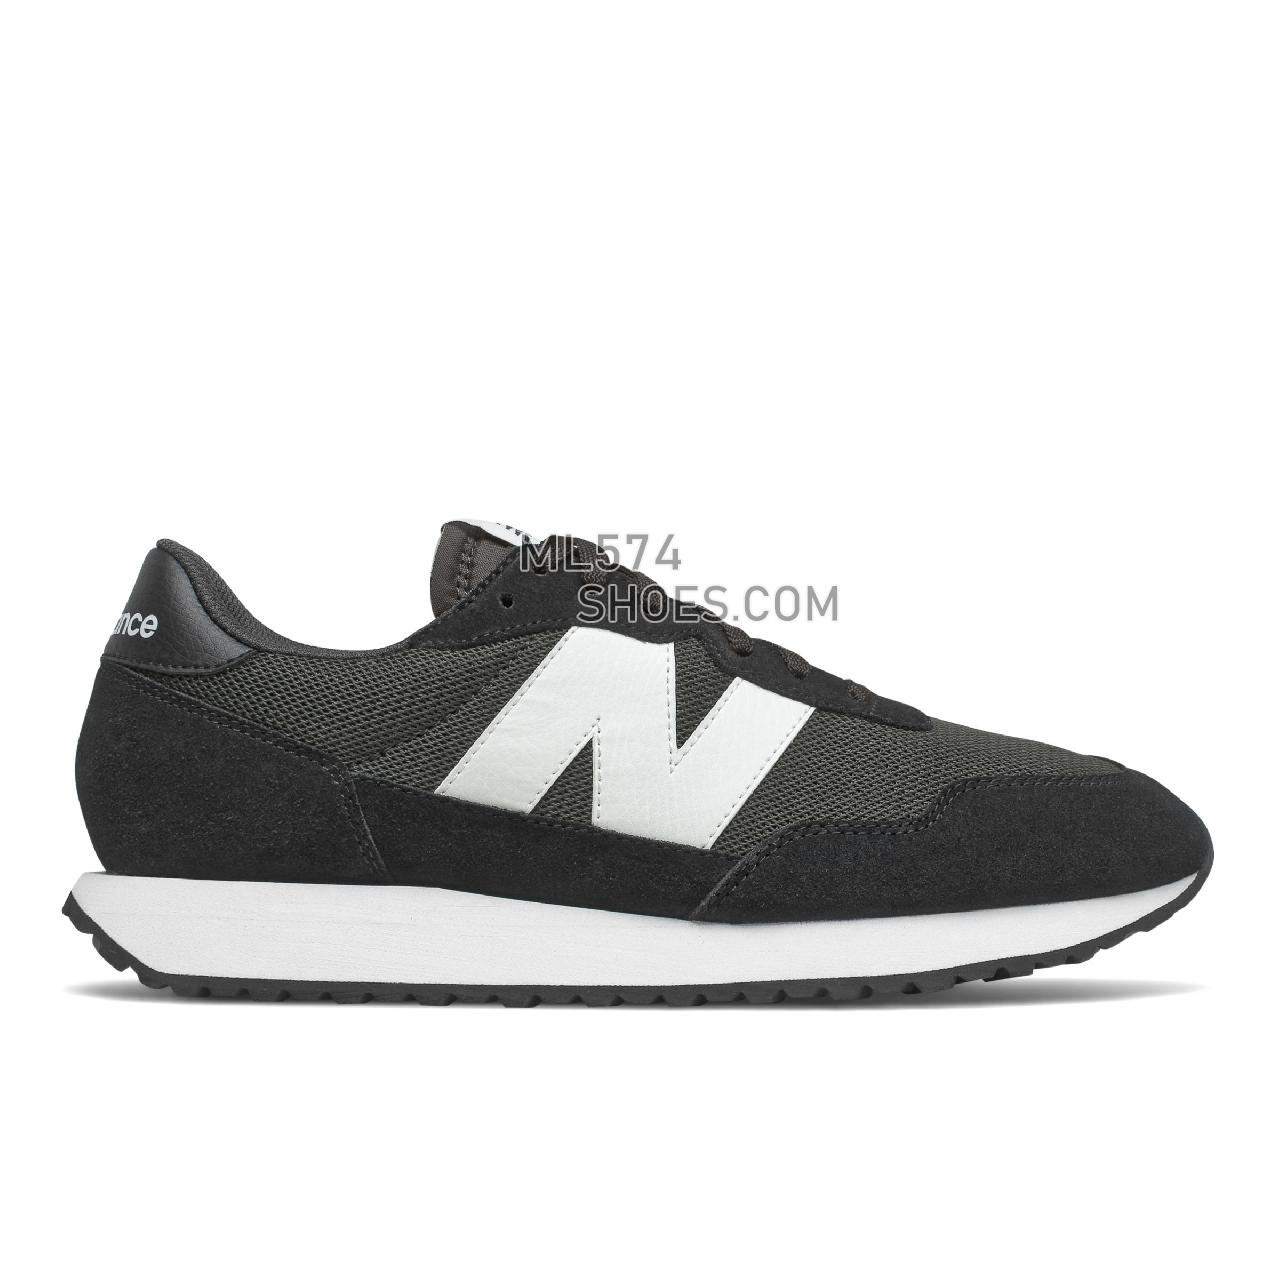 New Balance 237 - Men's Sport Style Sneakers - Black with Magnet - MS237CC